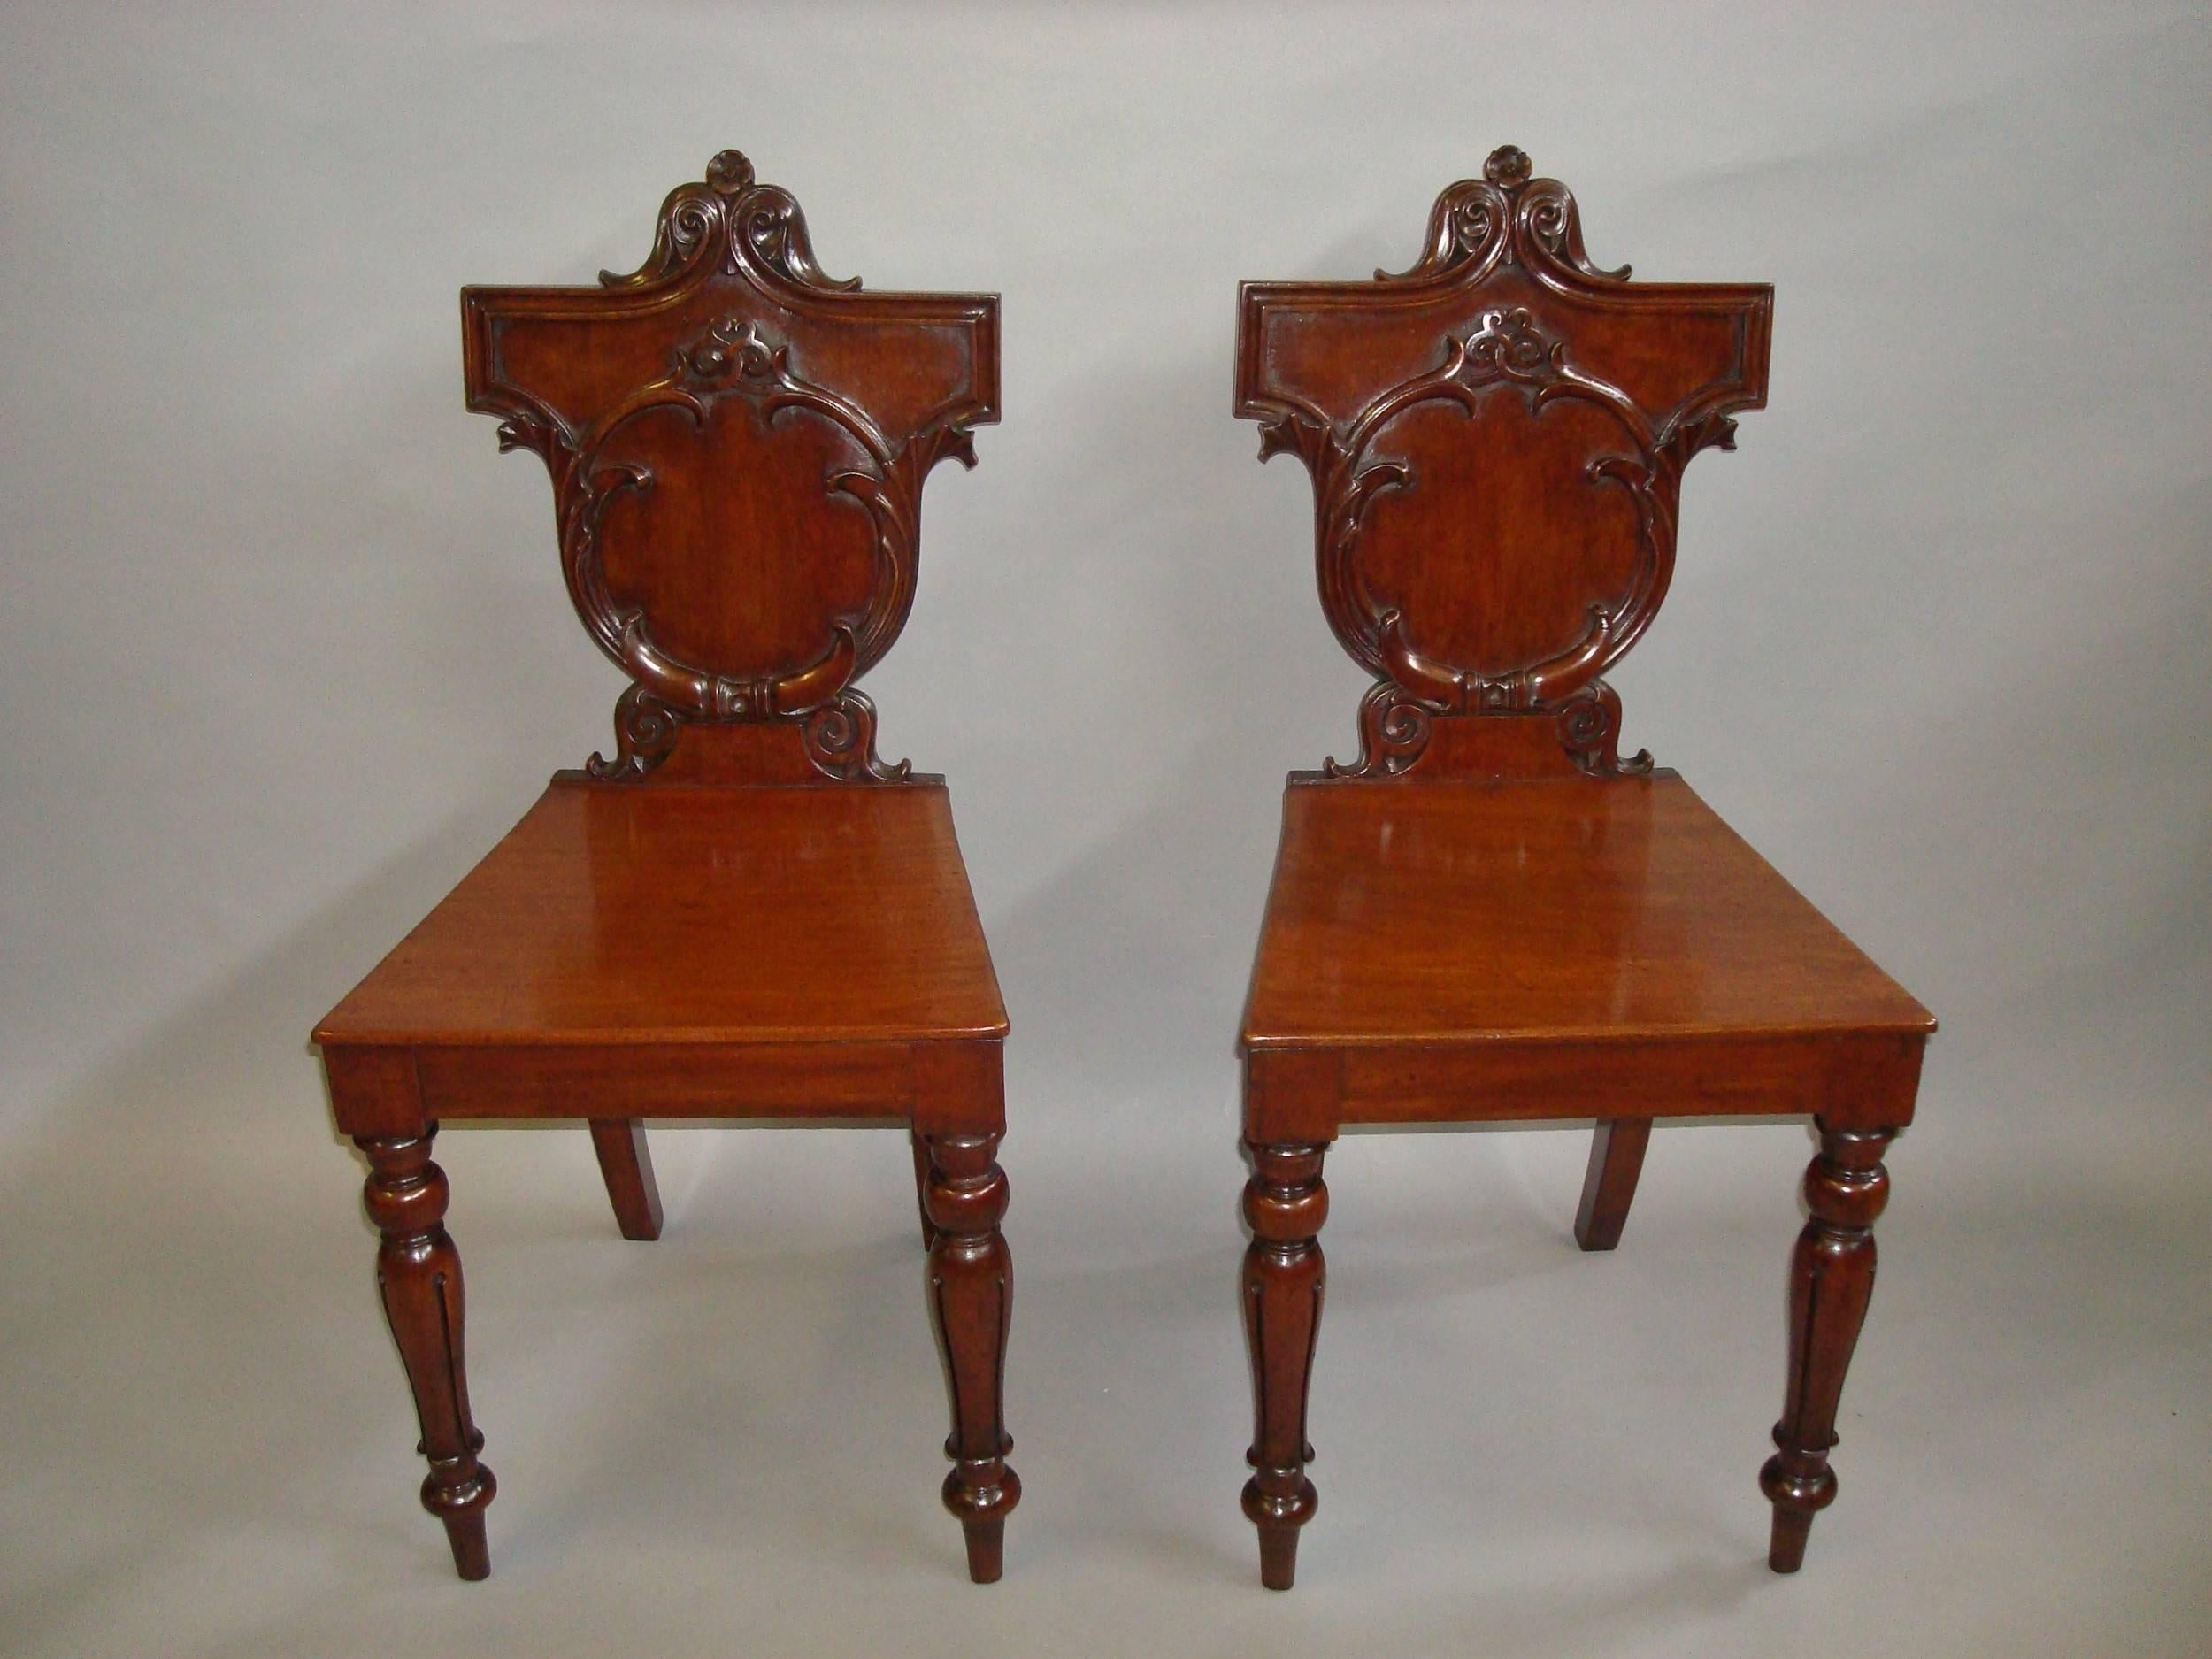 Late Regency pair of Irish mahogany hall chairs; the very shapely shield backs with acanthus scroll carving and moulded surround, headed with acanthus and flower head decoration with an interesting celtic motif below, the figured mahogany seats of